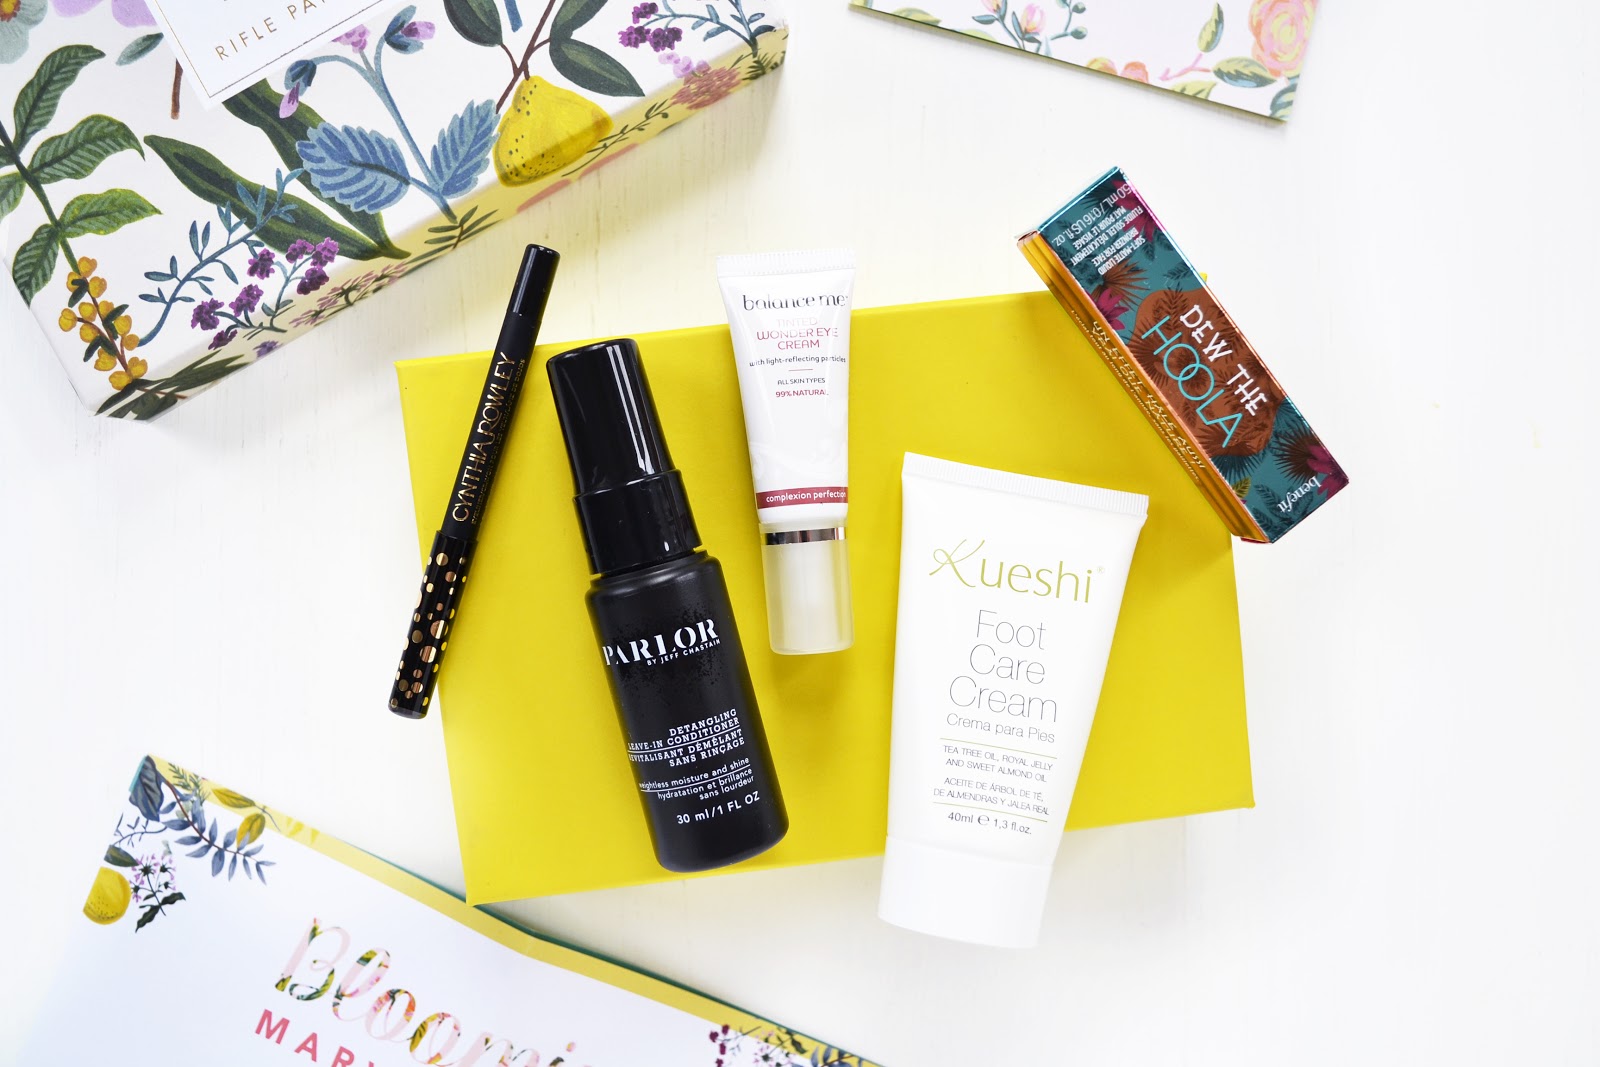 birchbox 2016, Birchbox April 2016 collaborated With Rifle Paper Co